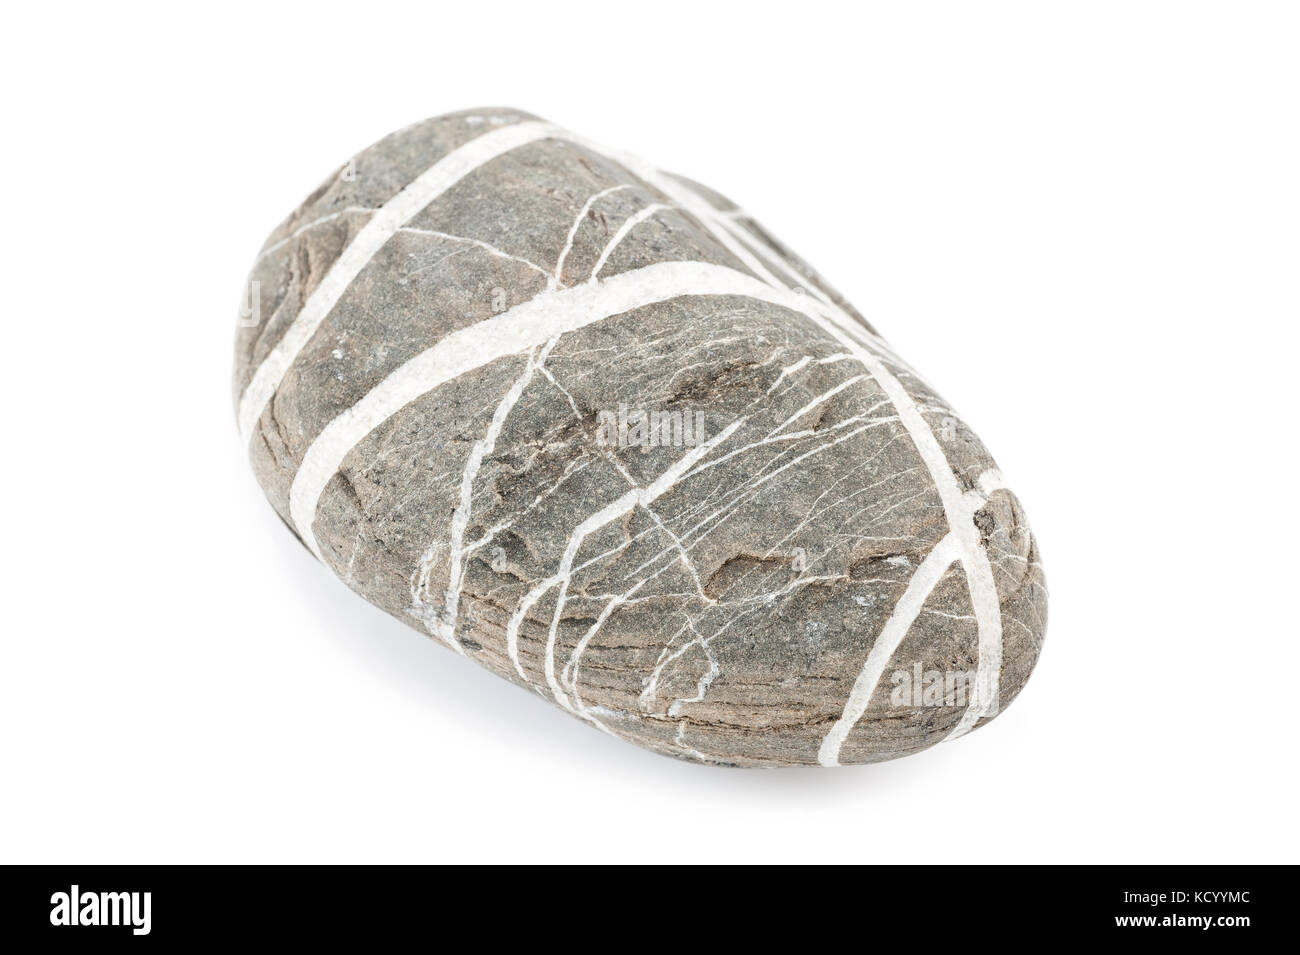 Rock boulder isolated on white Banque D'Images